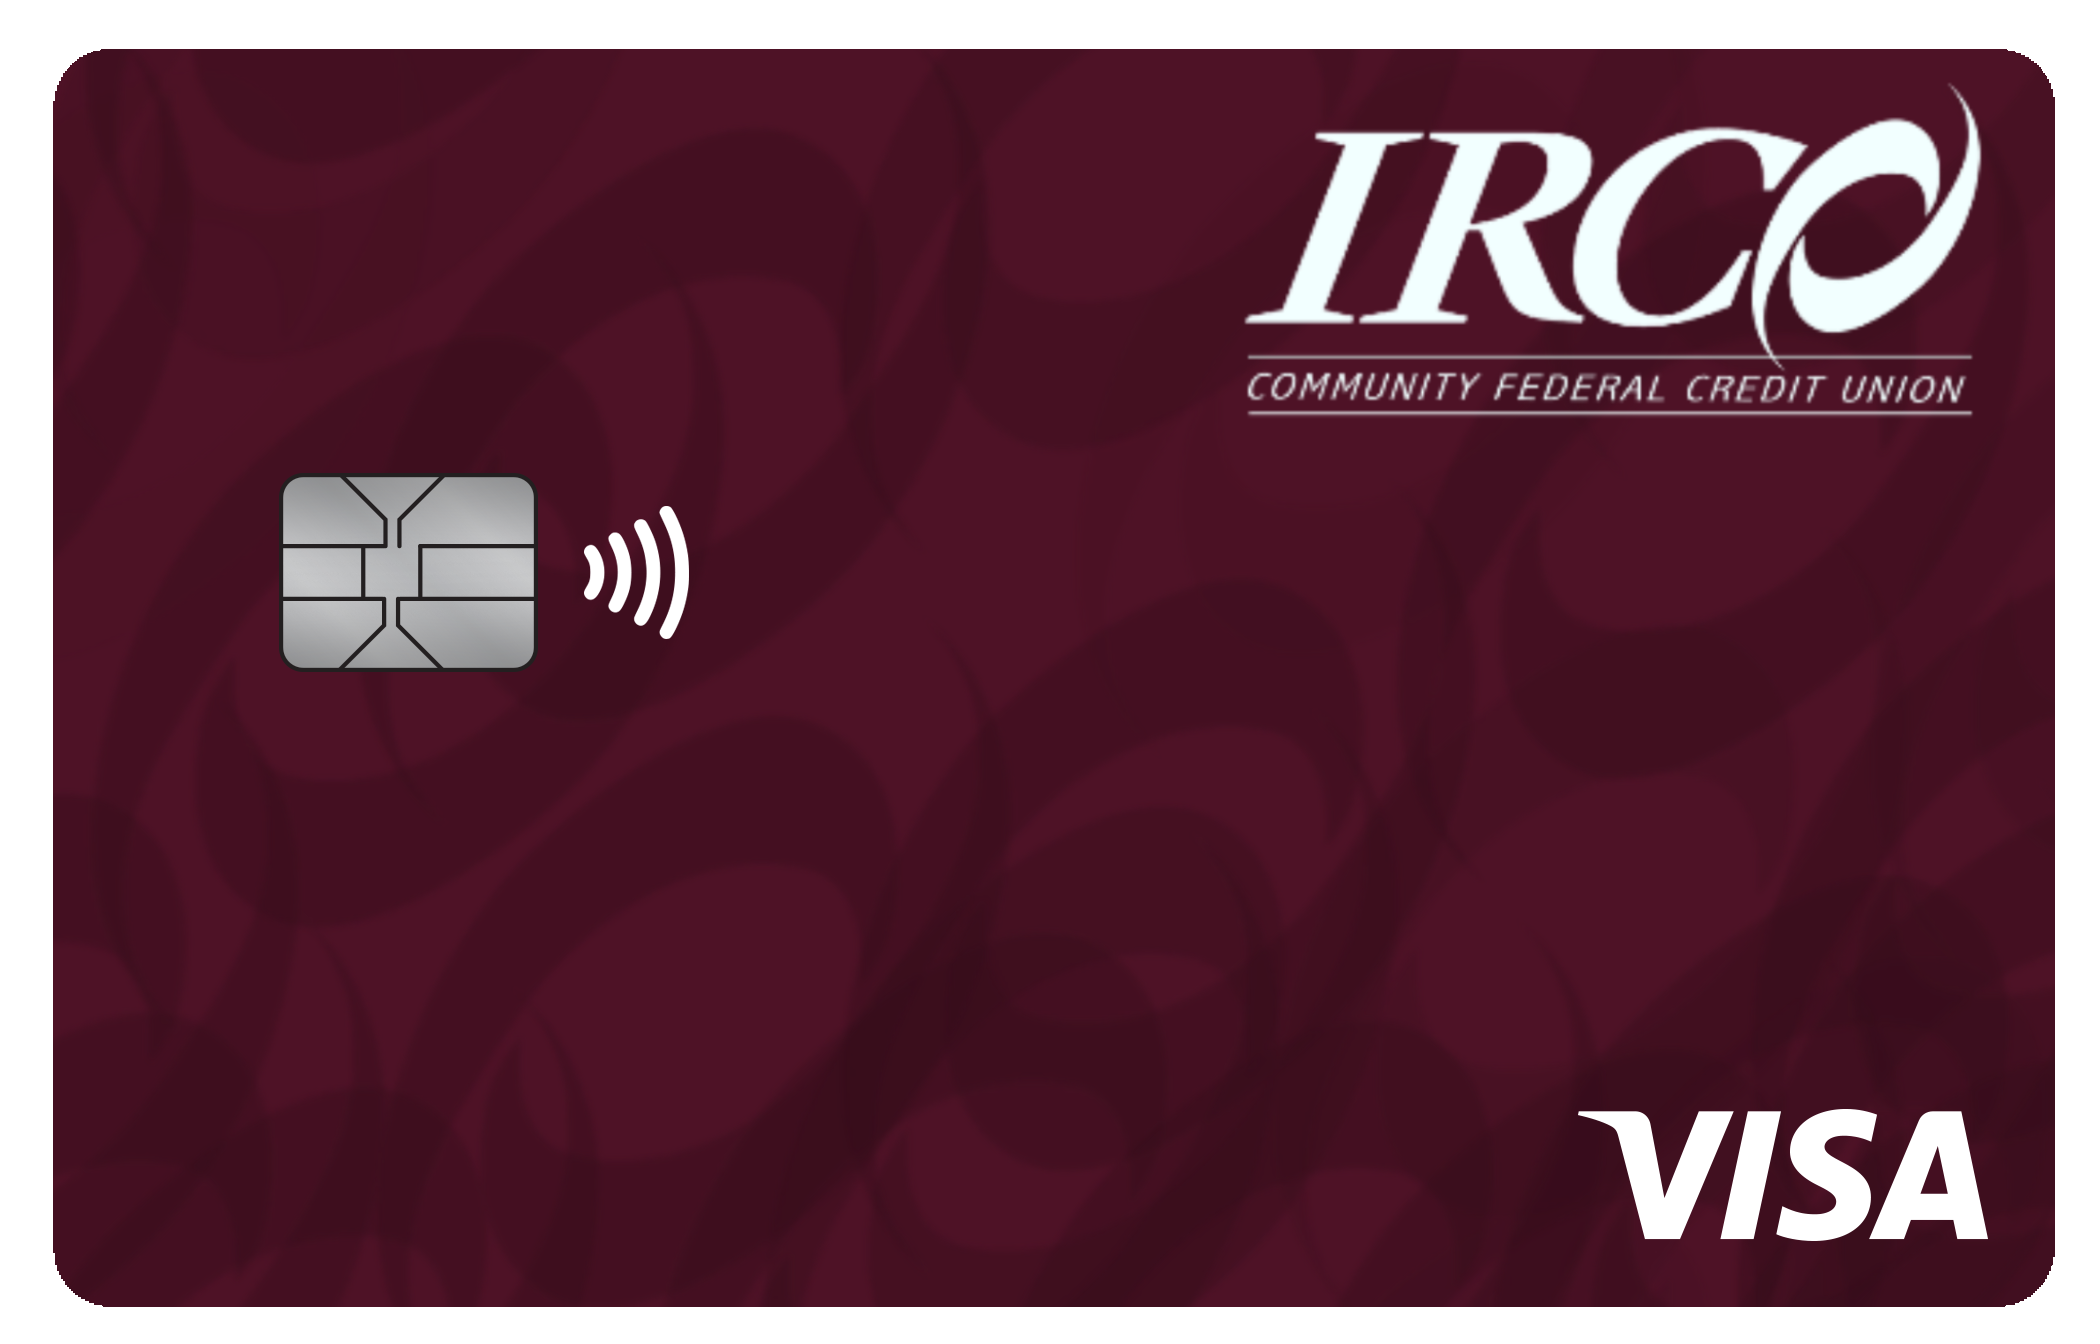 IRCO Community Federal Credit Union Max Cash Secured Card